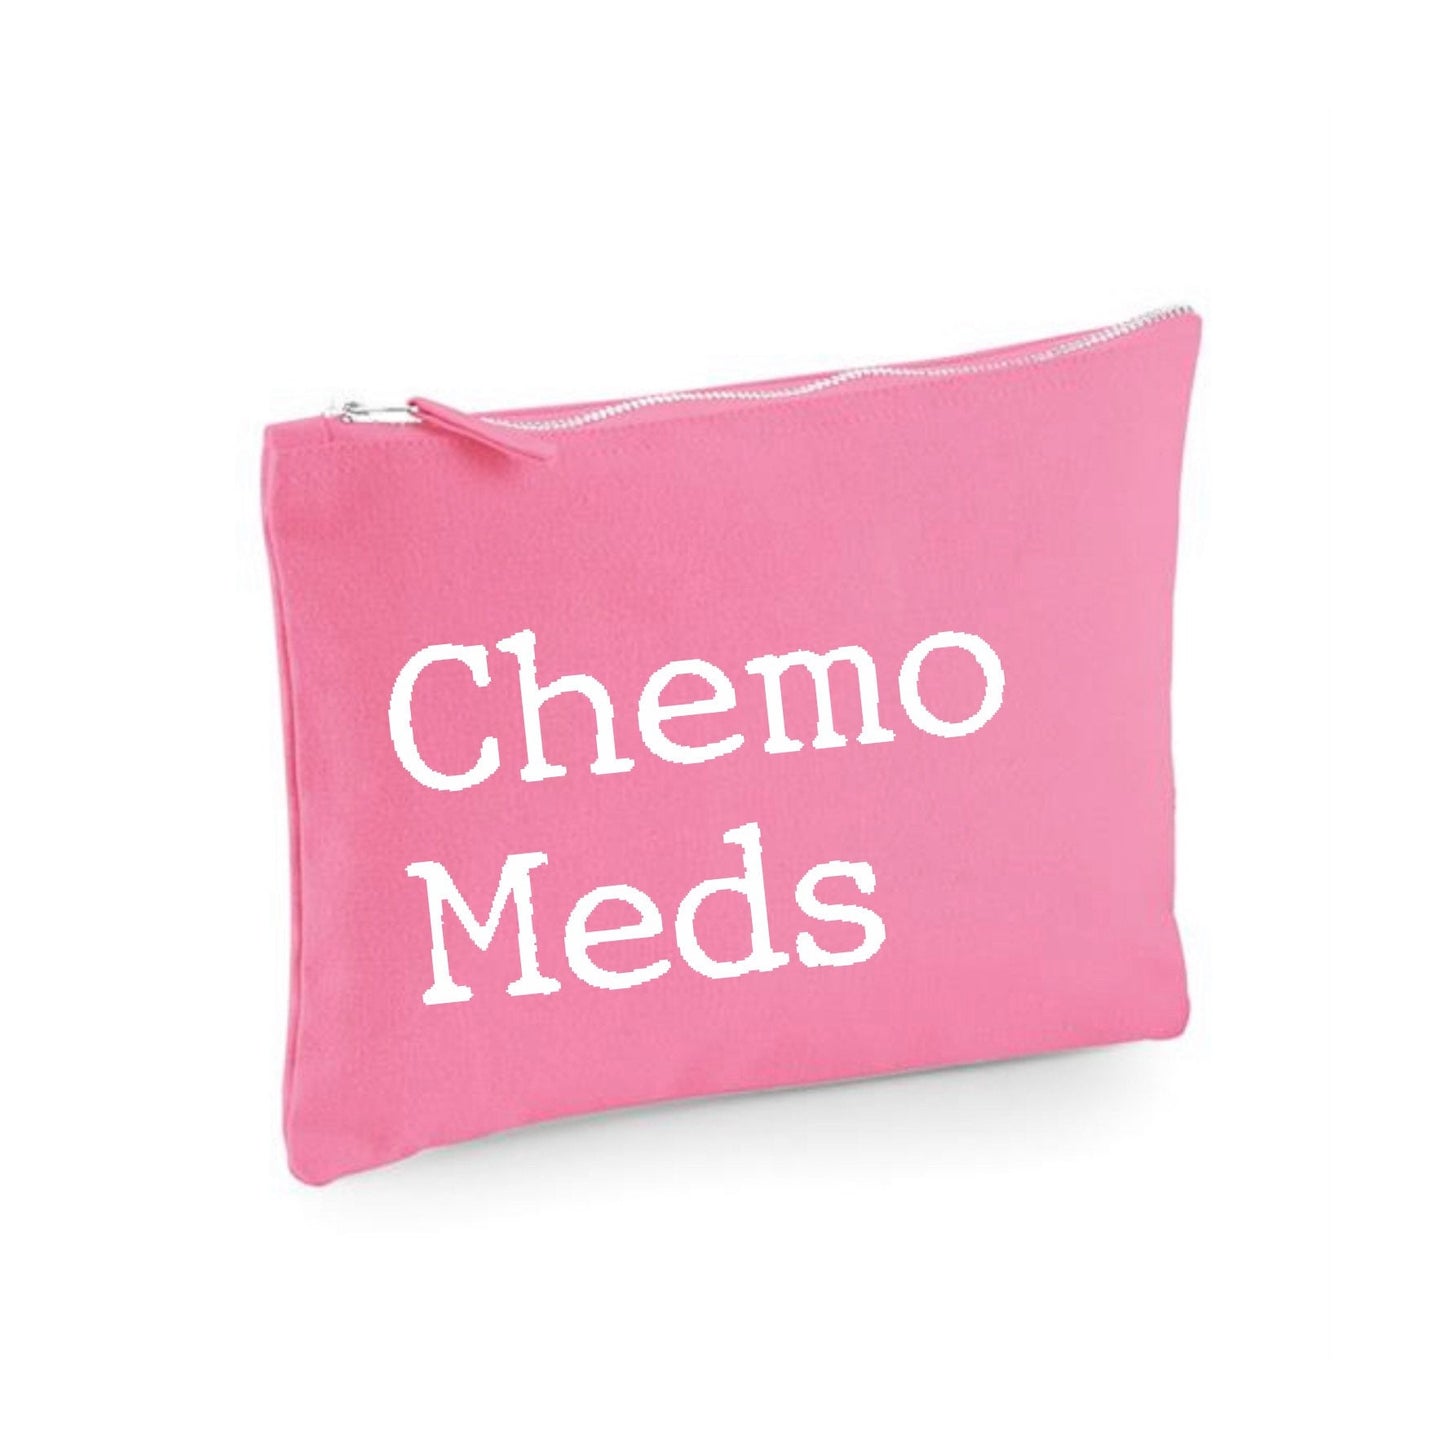 Chemo meds pouch, chemo crap bag for tablets, travel bag for all chemo stuff on holiday, travel essentials on chemo